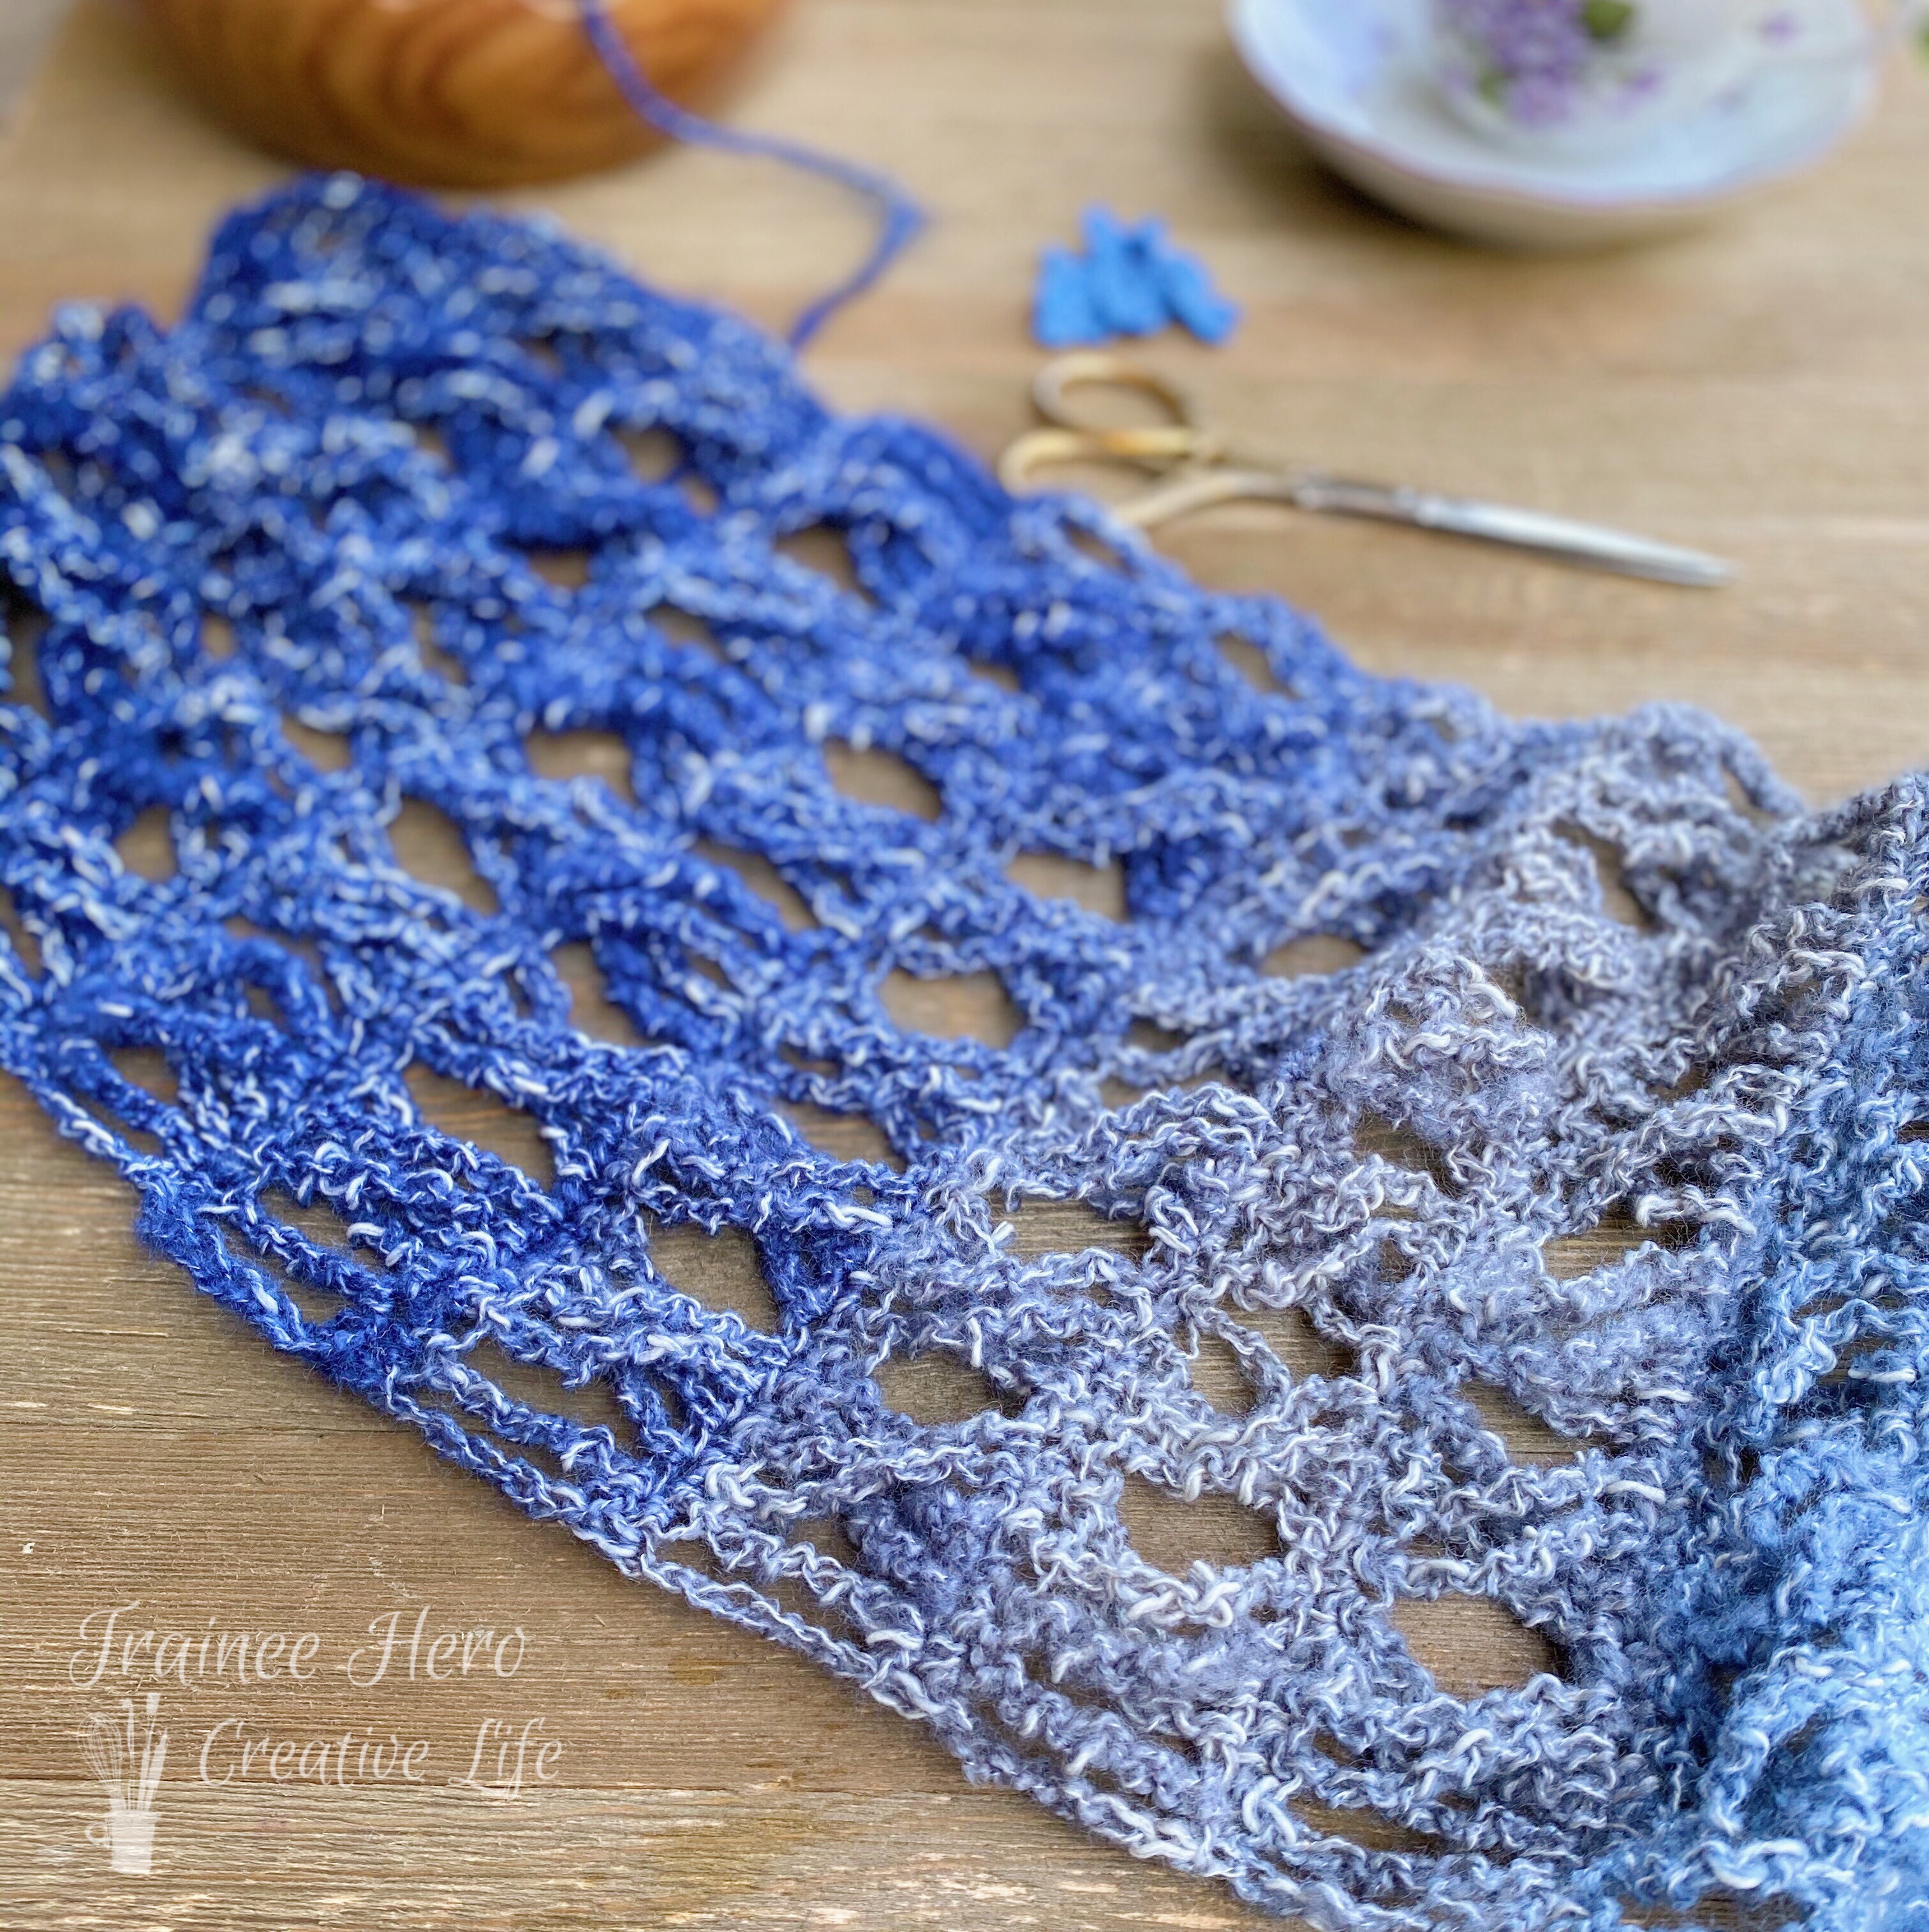 Stitch pattern of the convertible crochet scarf.